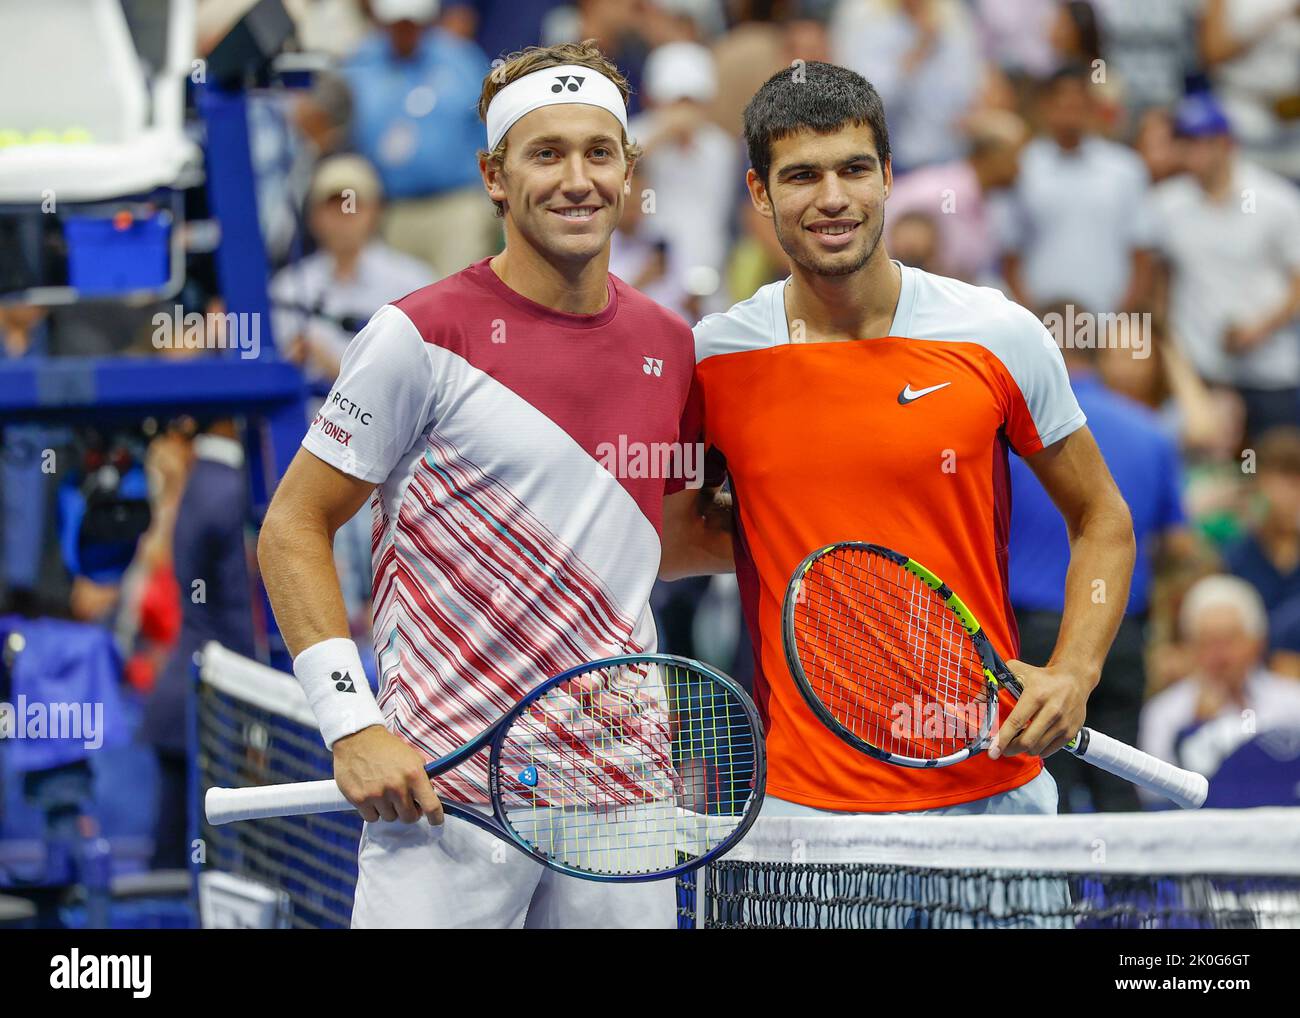 New York, USA, 11th. September 2022. L-R. Norwegian tennis player Casper Ruud and Spanish tennis player Carlos Alcaraz pose for a photo before tjhe start of the MenÕs Final of the  US  Open  Championships,Billie Jean King National Tennis Center on Sunday 11 September 2022. © Juergen Hasenkopf / Alamy Live News Stock Photo